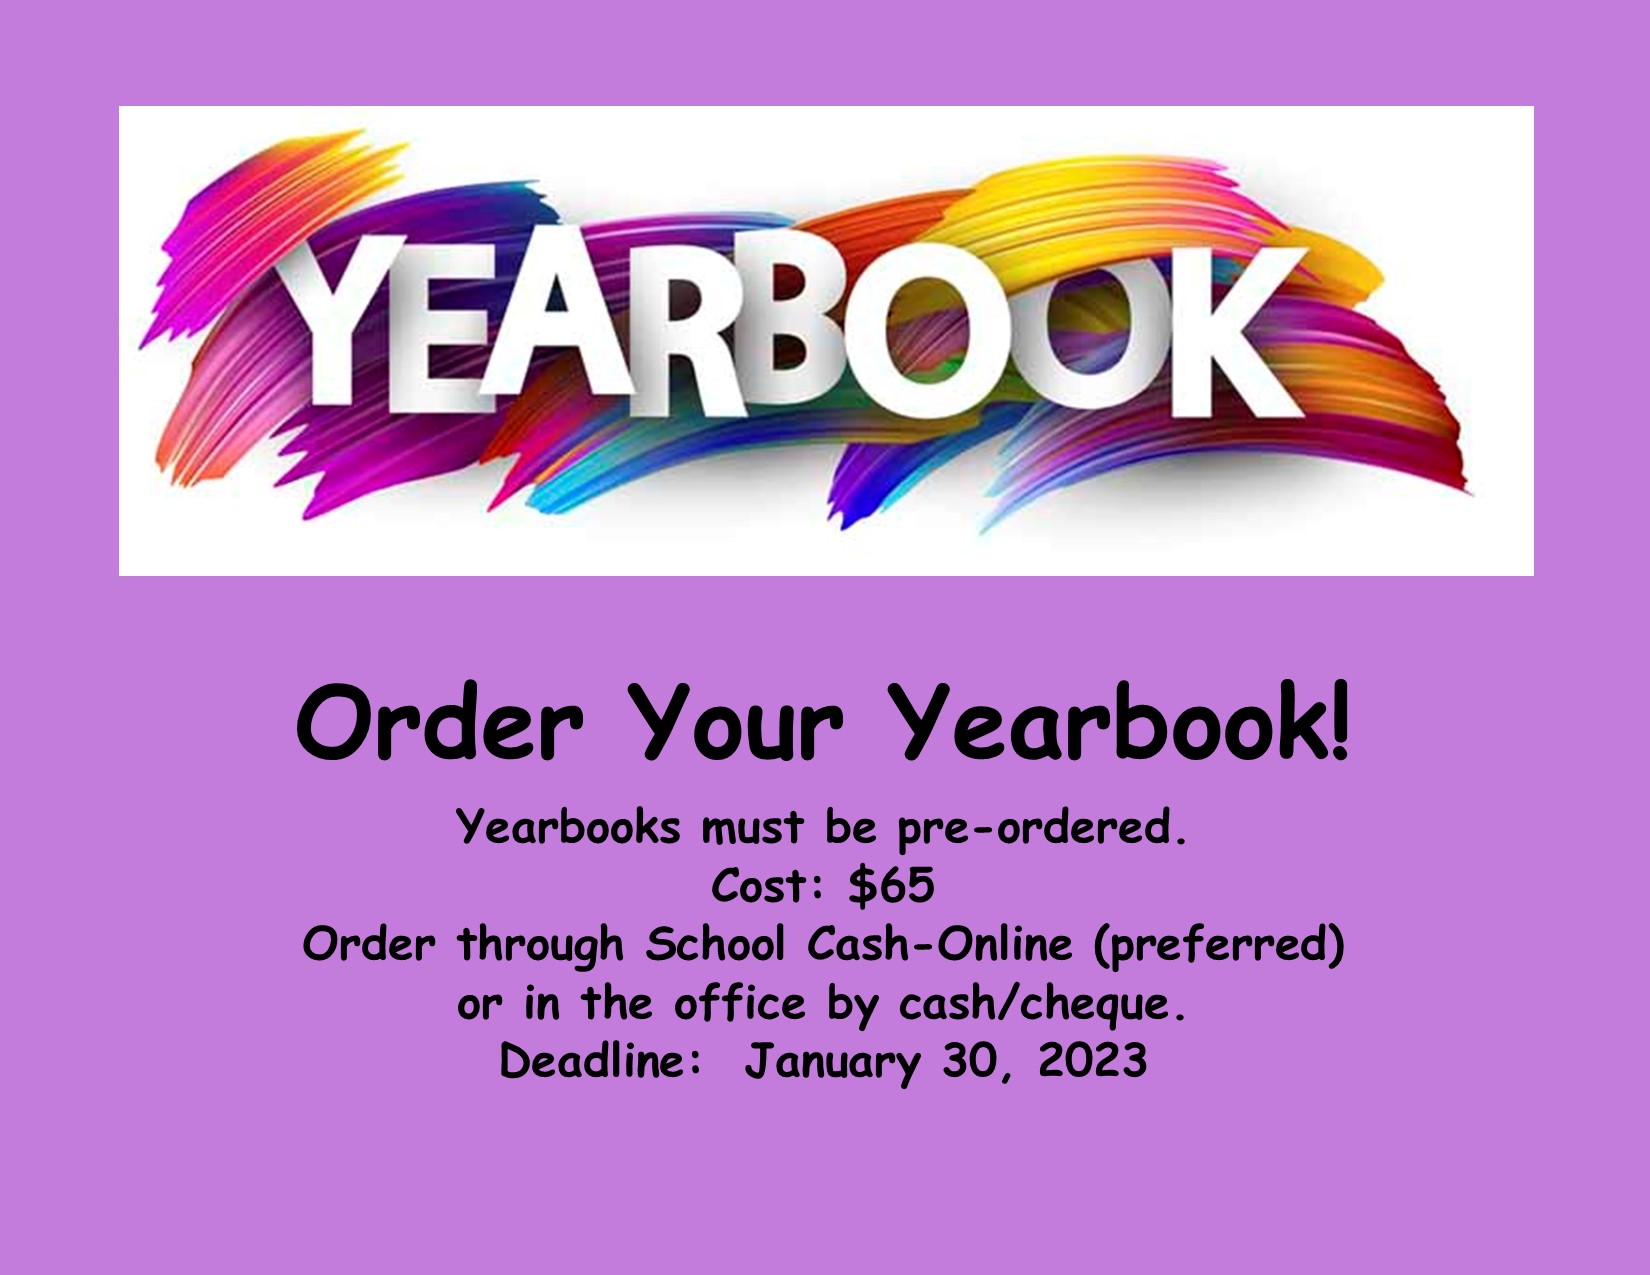 DON'T FORGET TO ORDER YOUR YEARBOOK!